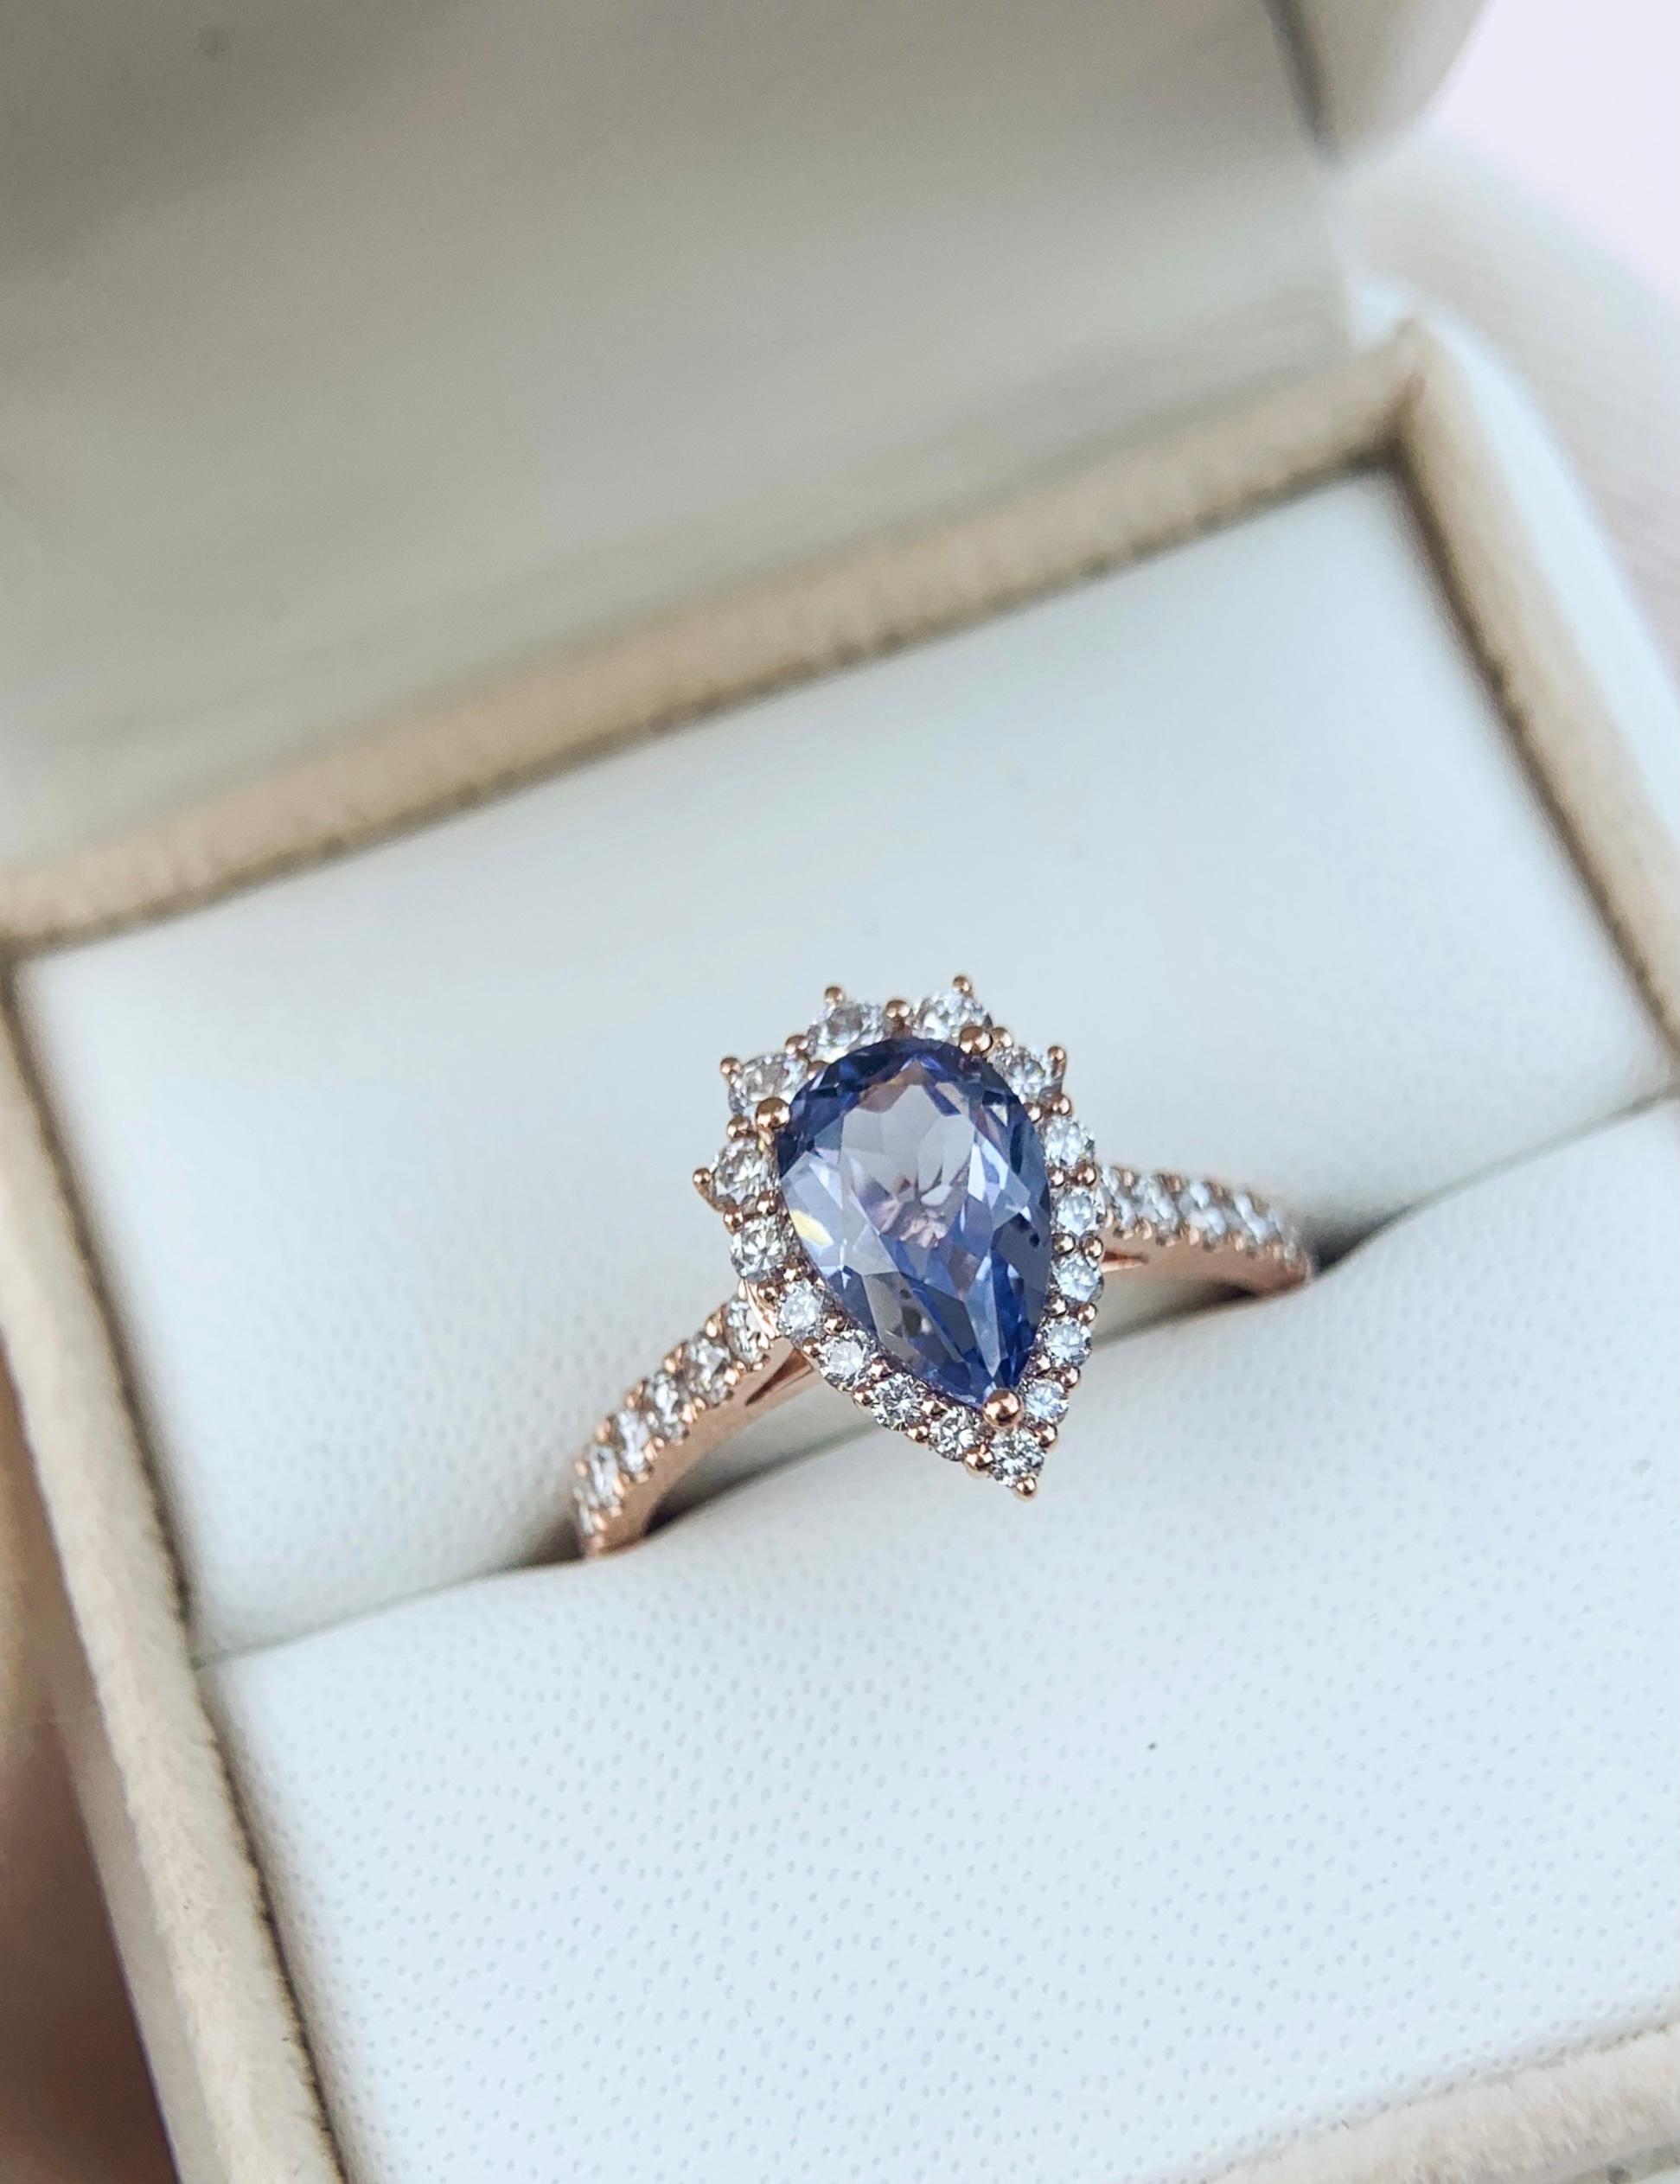 7 Engagement Ring Shopping Mistakes and How to Avoid Them Cover Photo